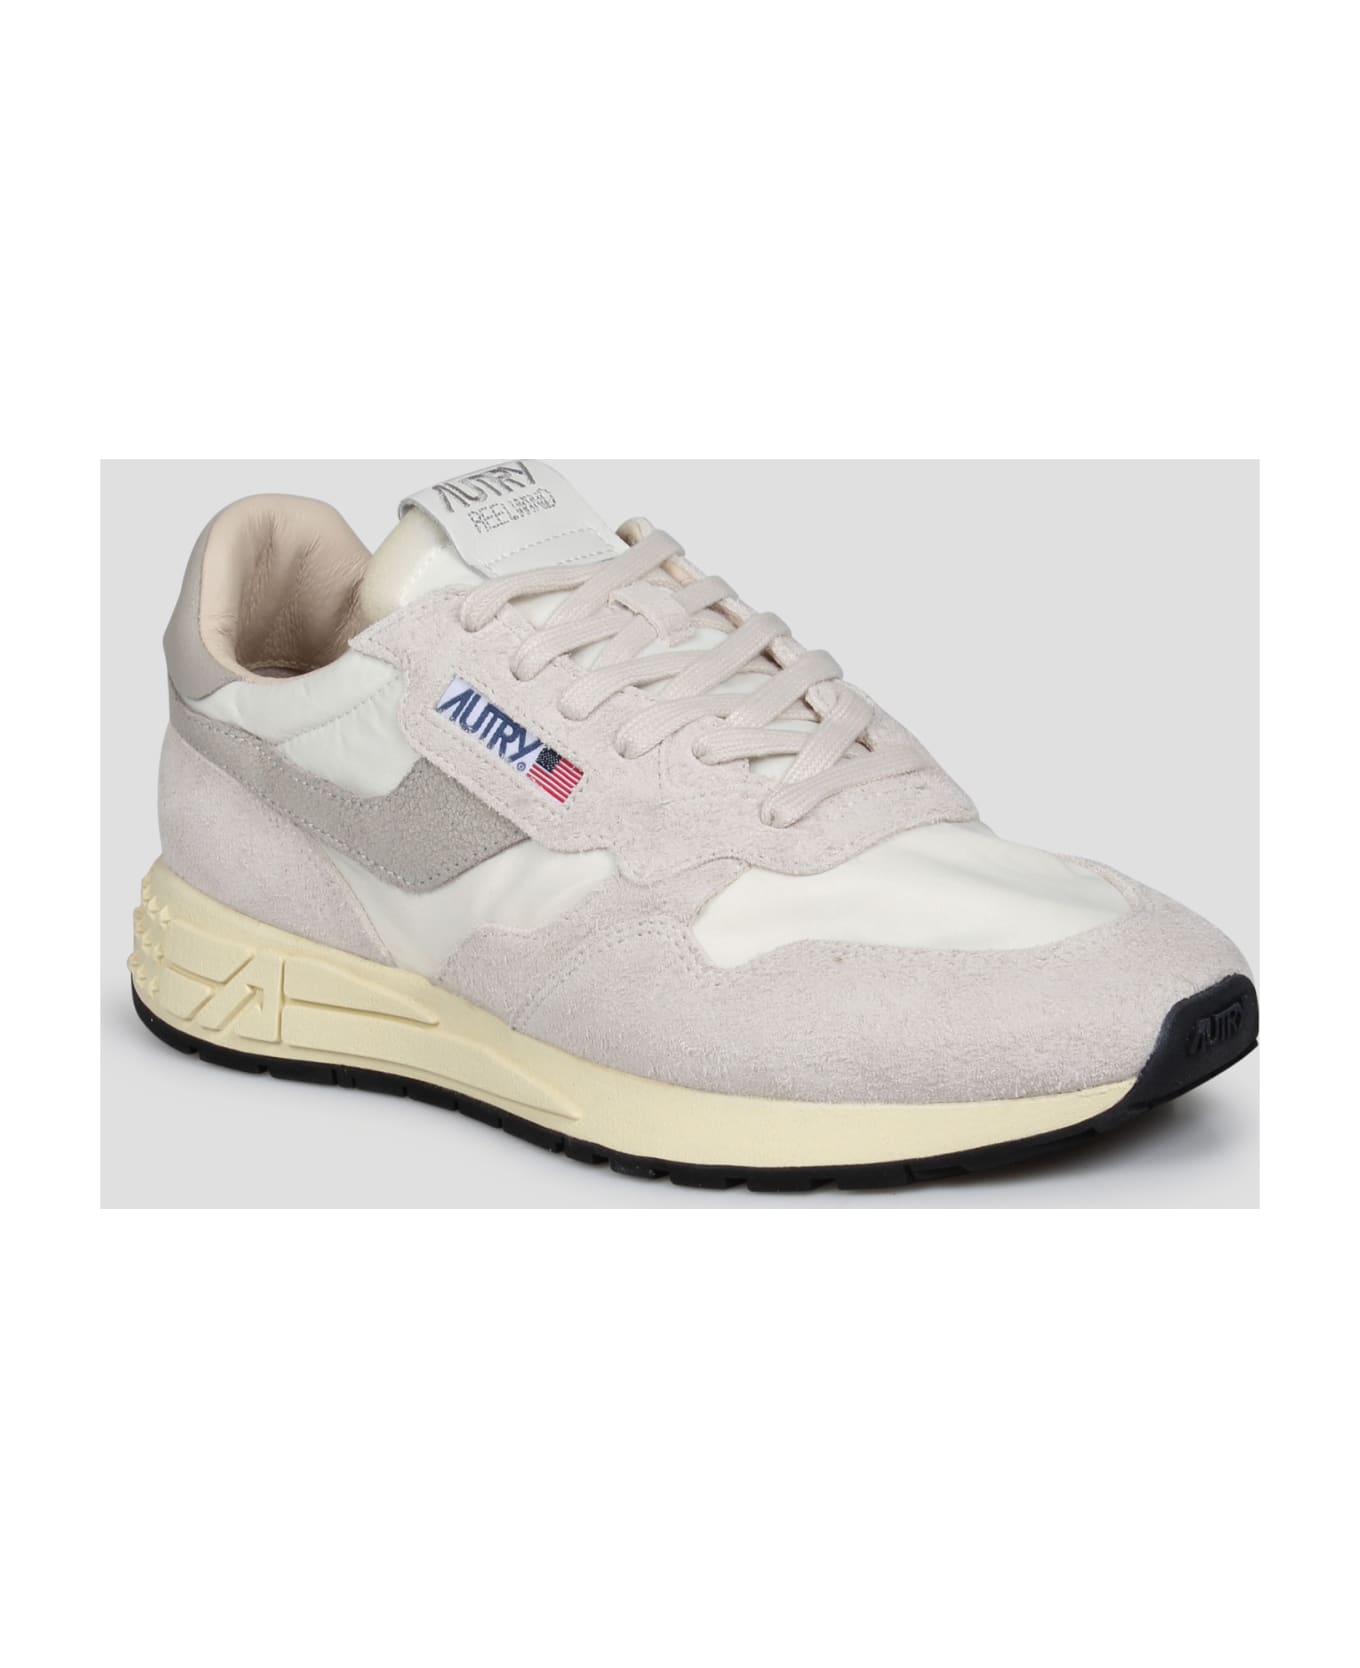 Autry Reelwind Low Sneakers - White スニーカー